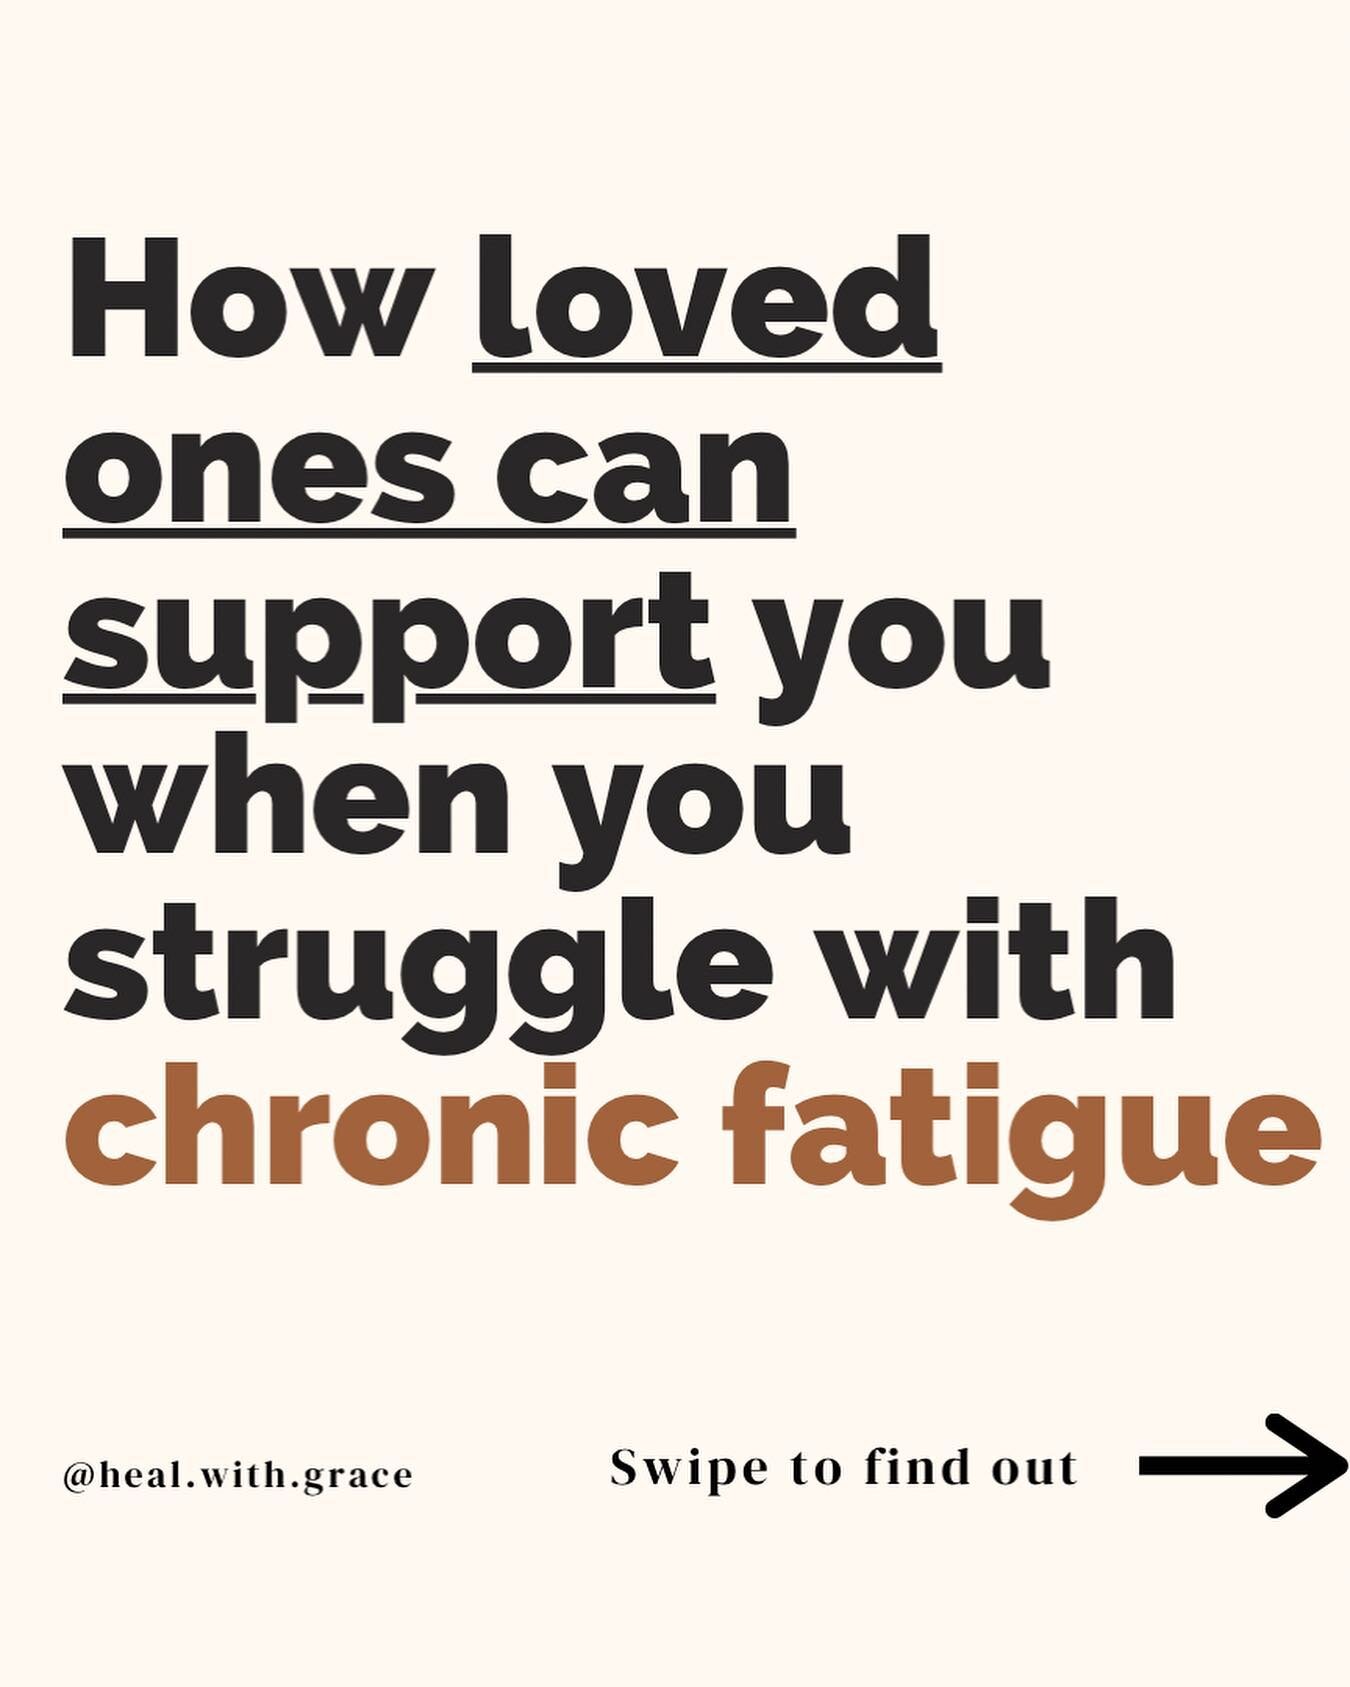 🫶If you want to support your loved ones dealing with chronic illness, pay attention...

❤️ Many people underestimate the emotional toll that chronic illness can take on individuals and their loved ones. Learning how to support someone with a chronic